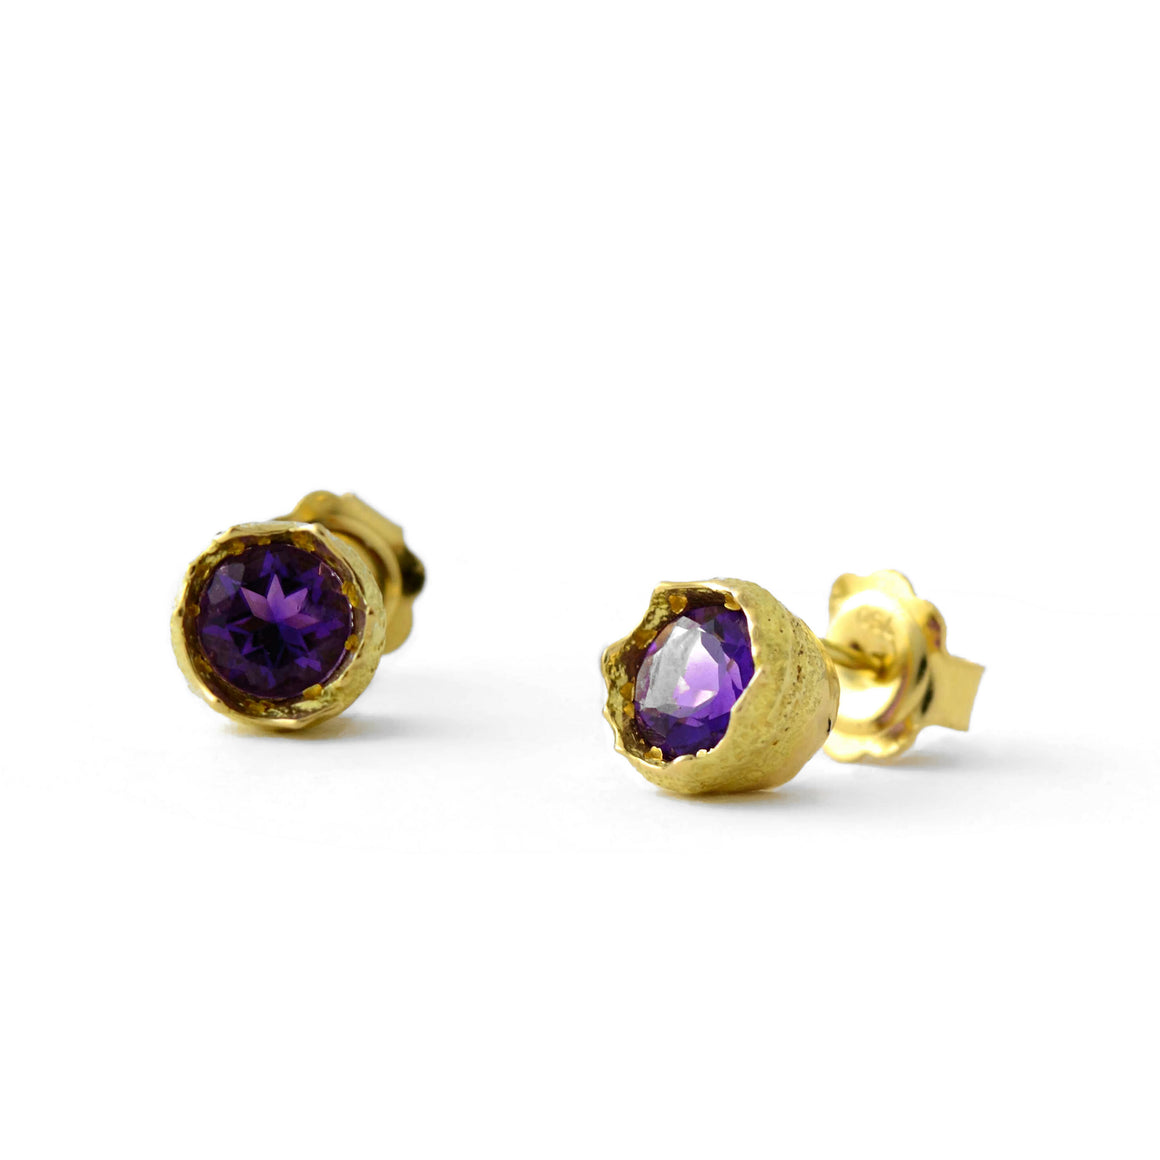 18ct fairtrade gold stud earrings with a 5 mm gemstone